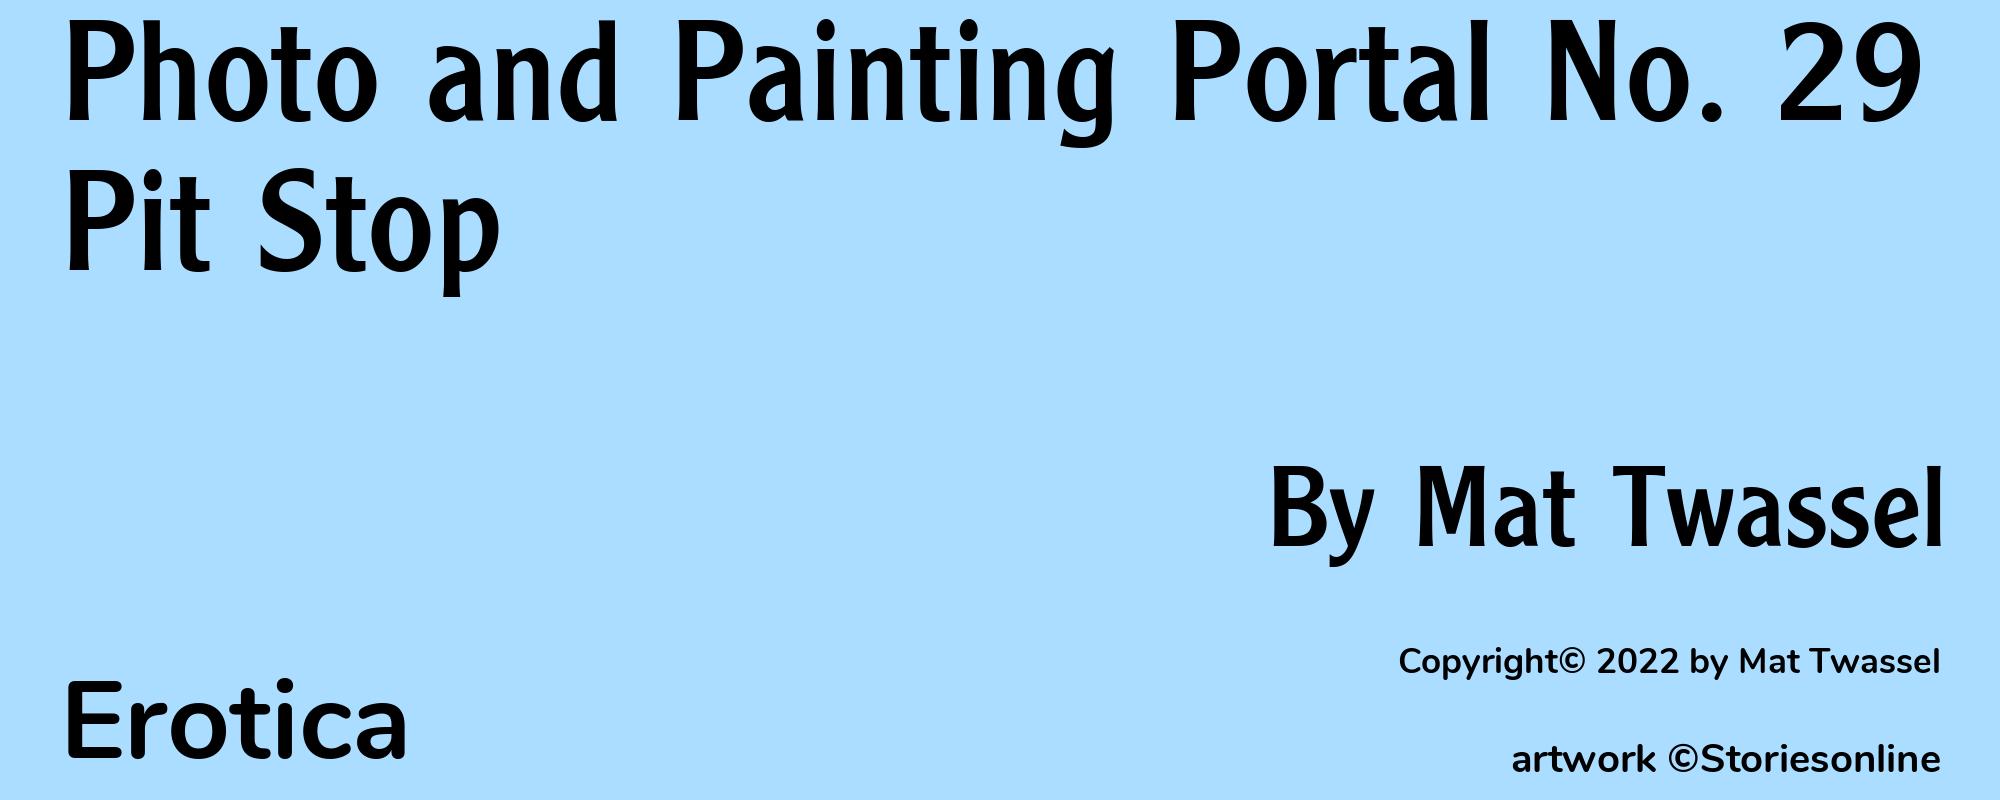 Photo and Painting Portal No. 29 Pit Stop - Cover